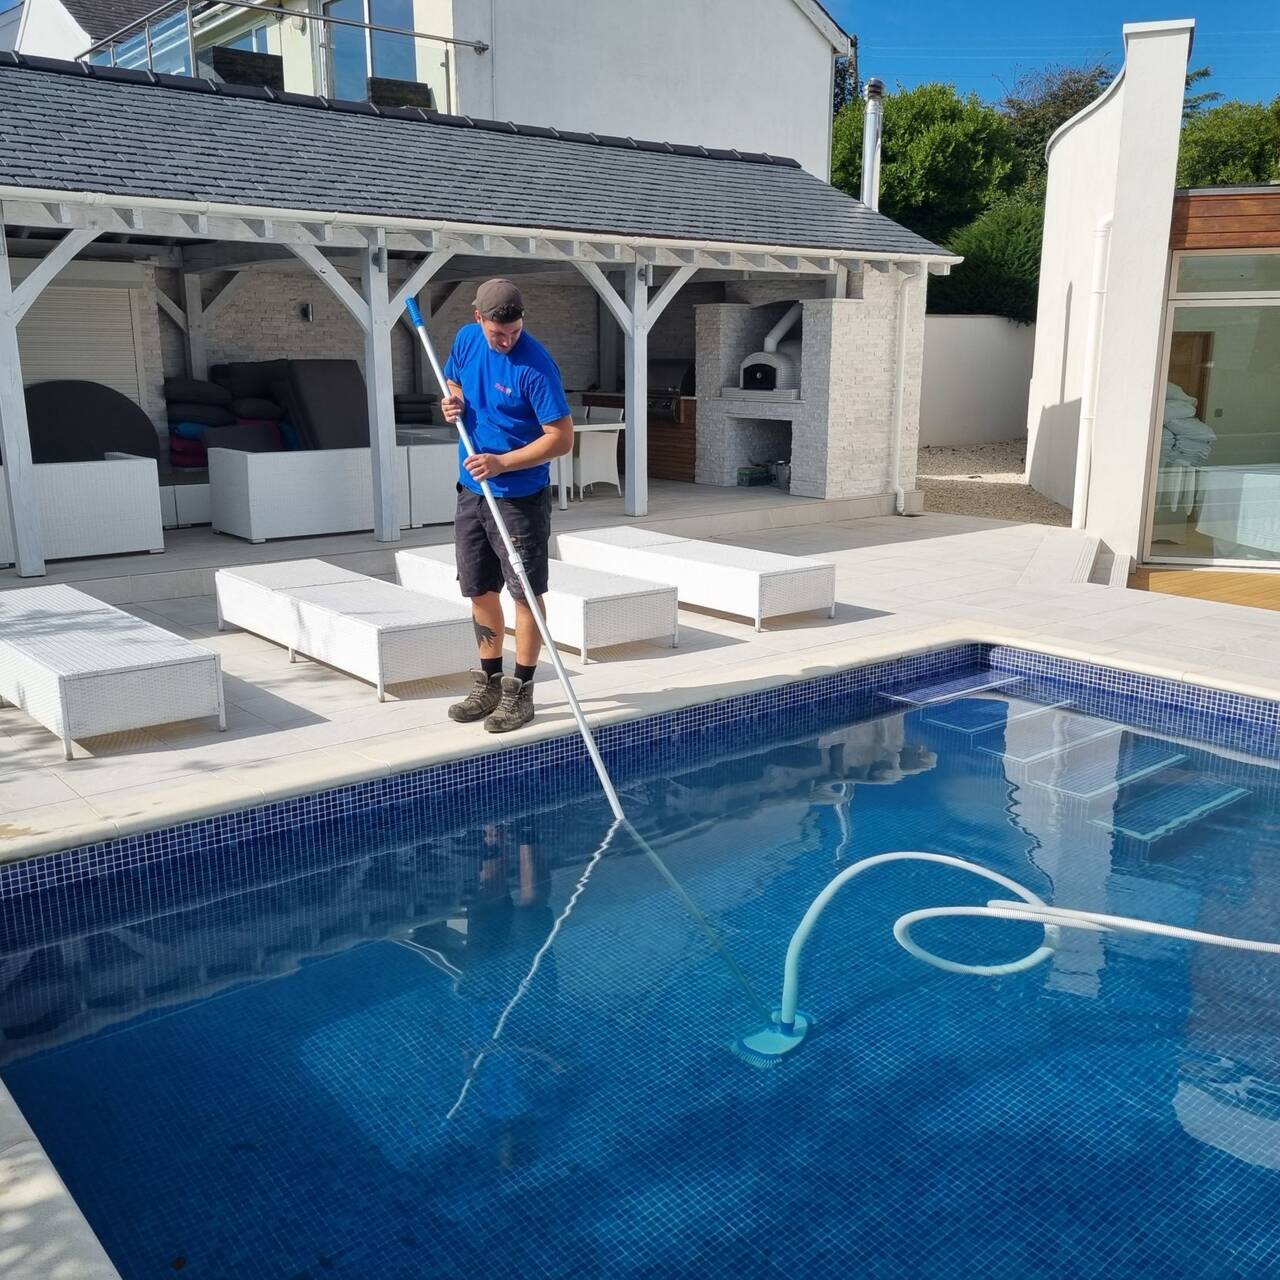 Outdoor swimming pool during service vac